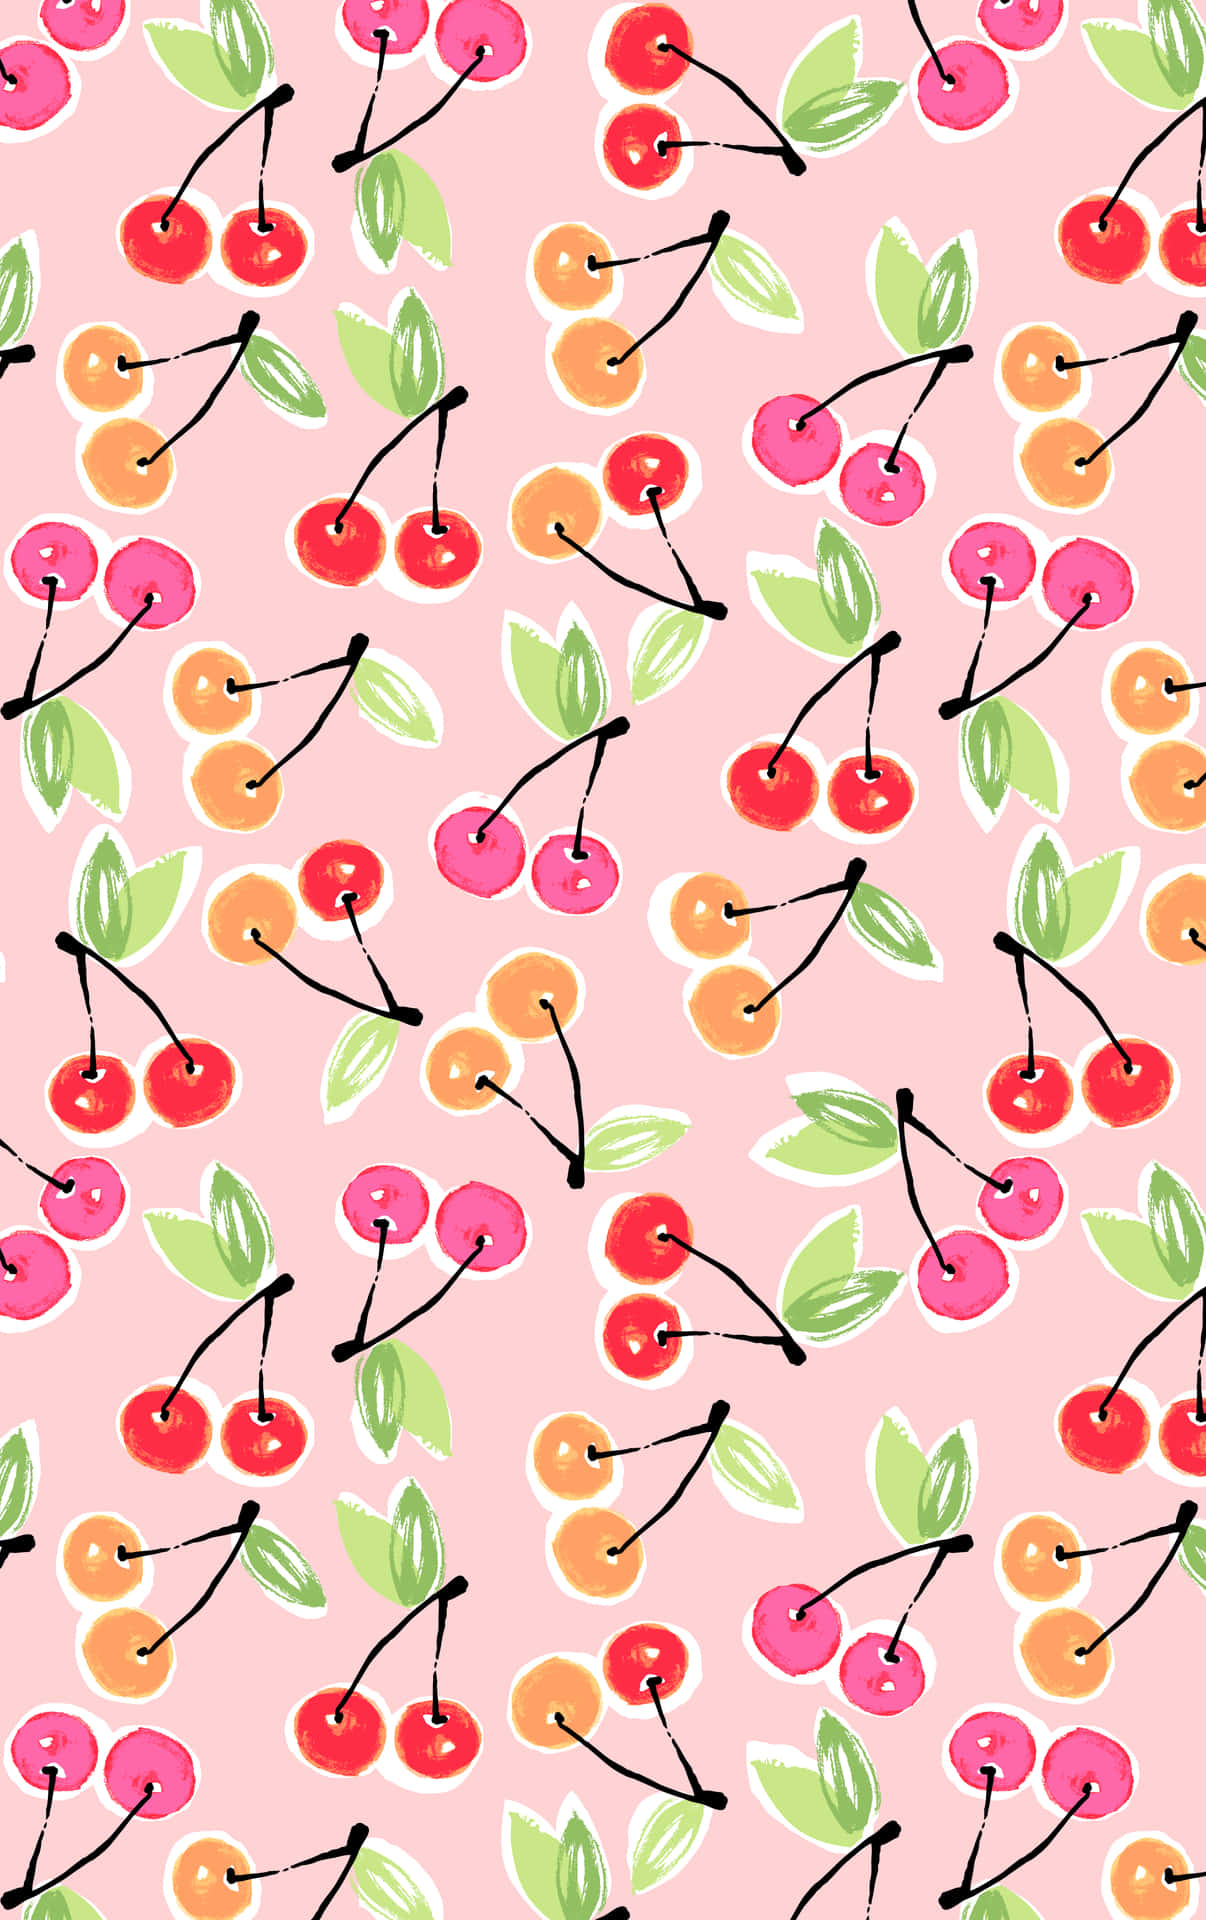 A Pink Fabric With Cherries On It Wallpaper